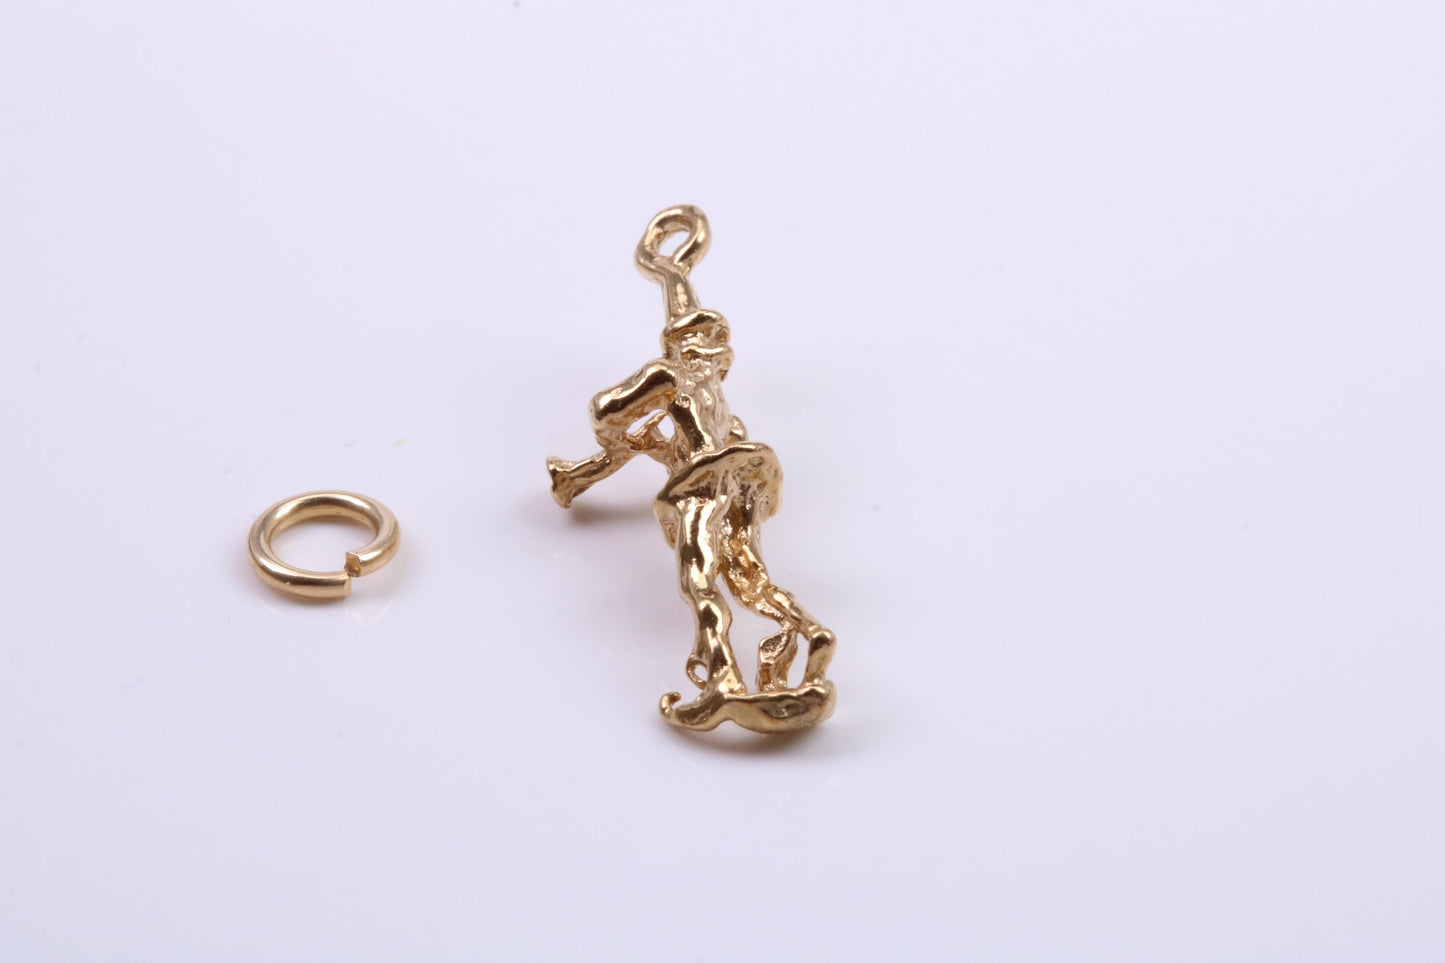 Pied Piper of Hamelin Charm, Traditional Charm, Made from Solid 9ct Yellow Gold, British Hallmarked, Complete with Attachment Link